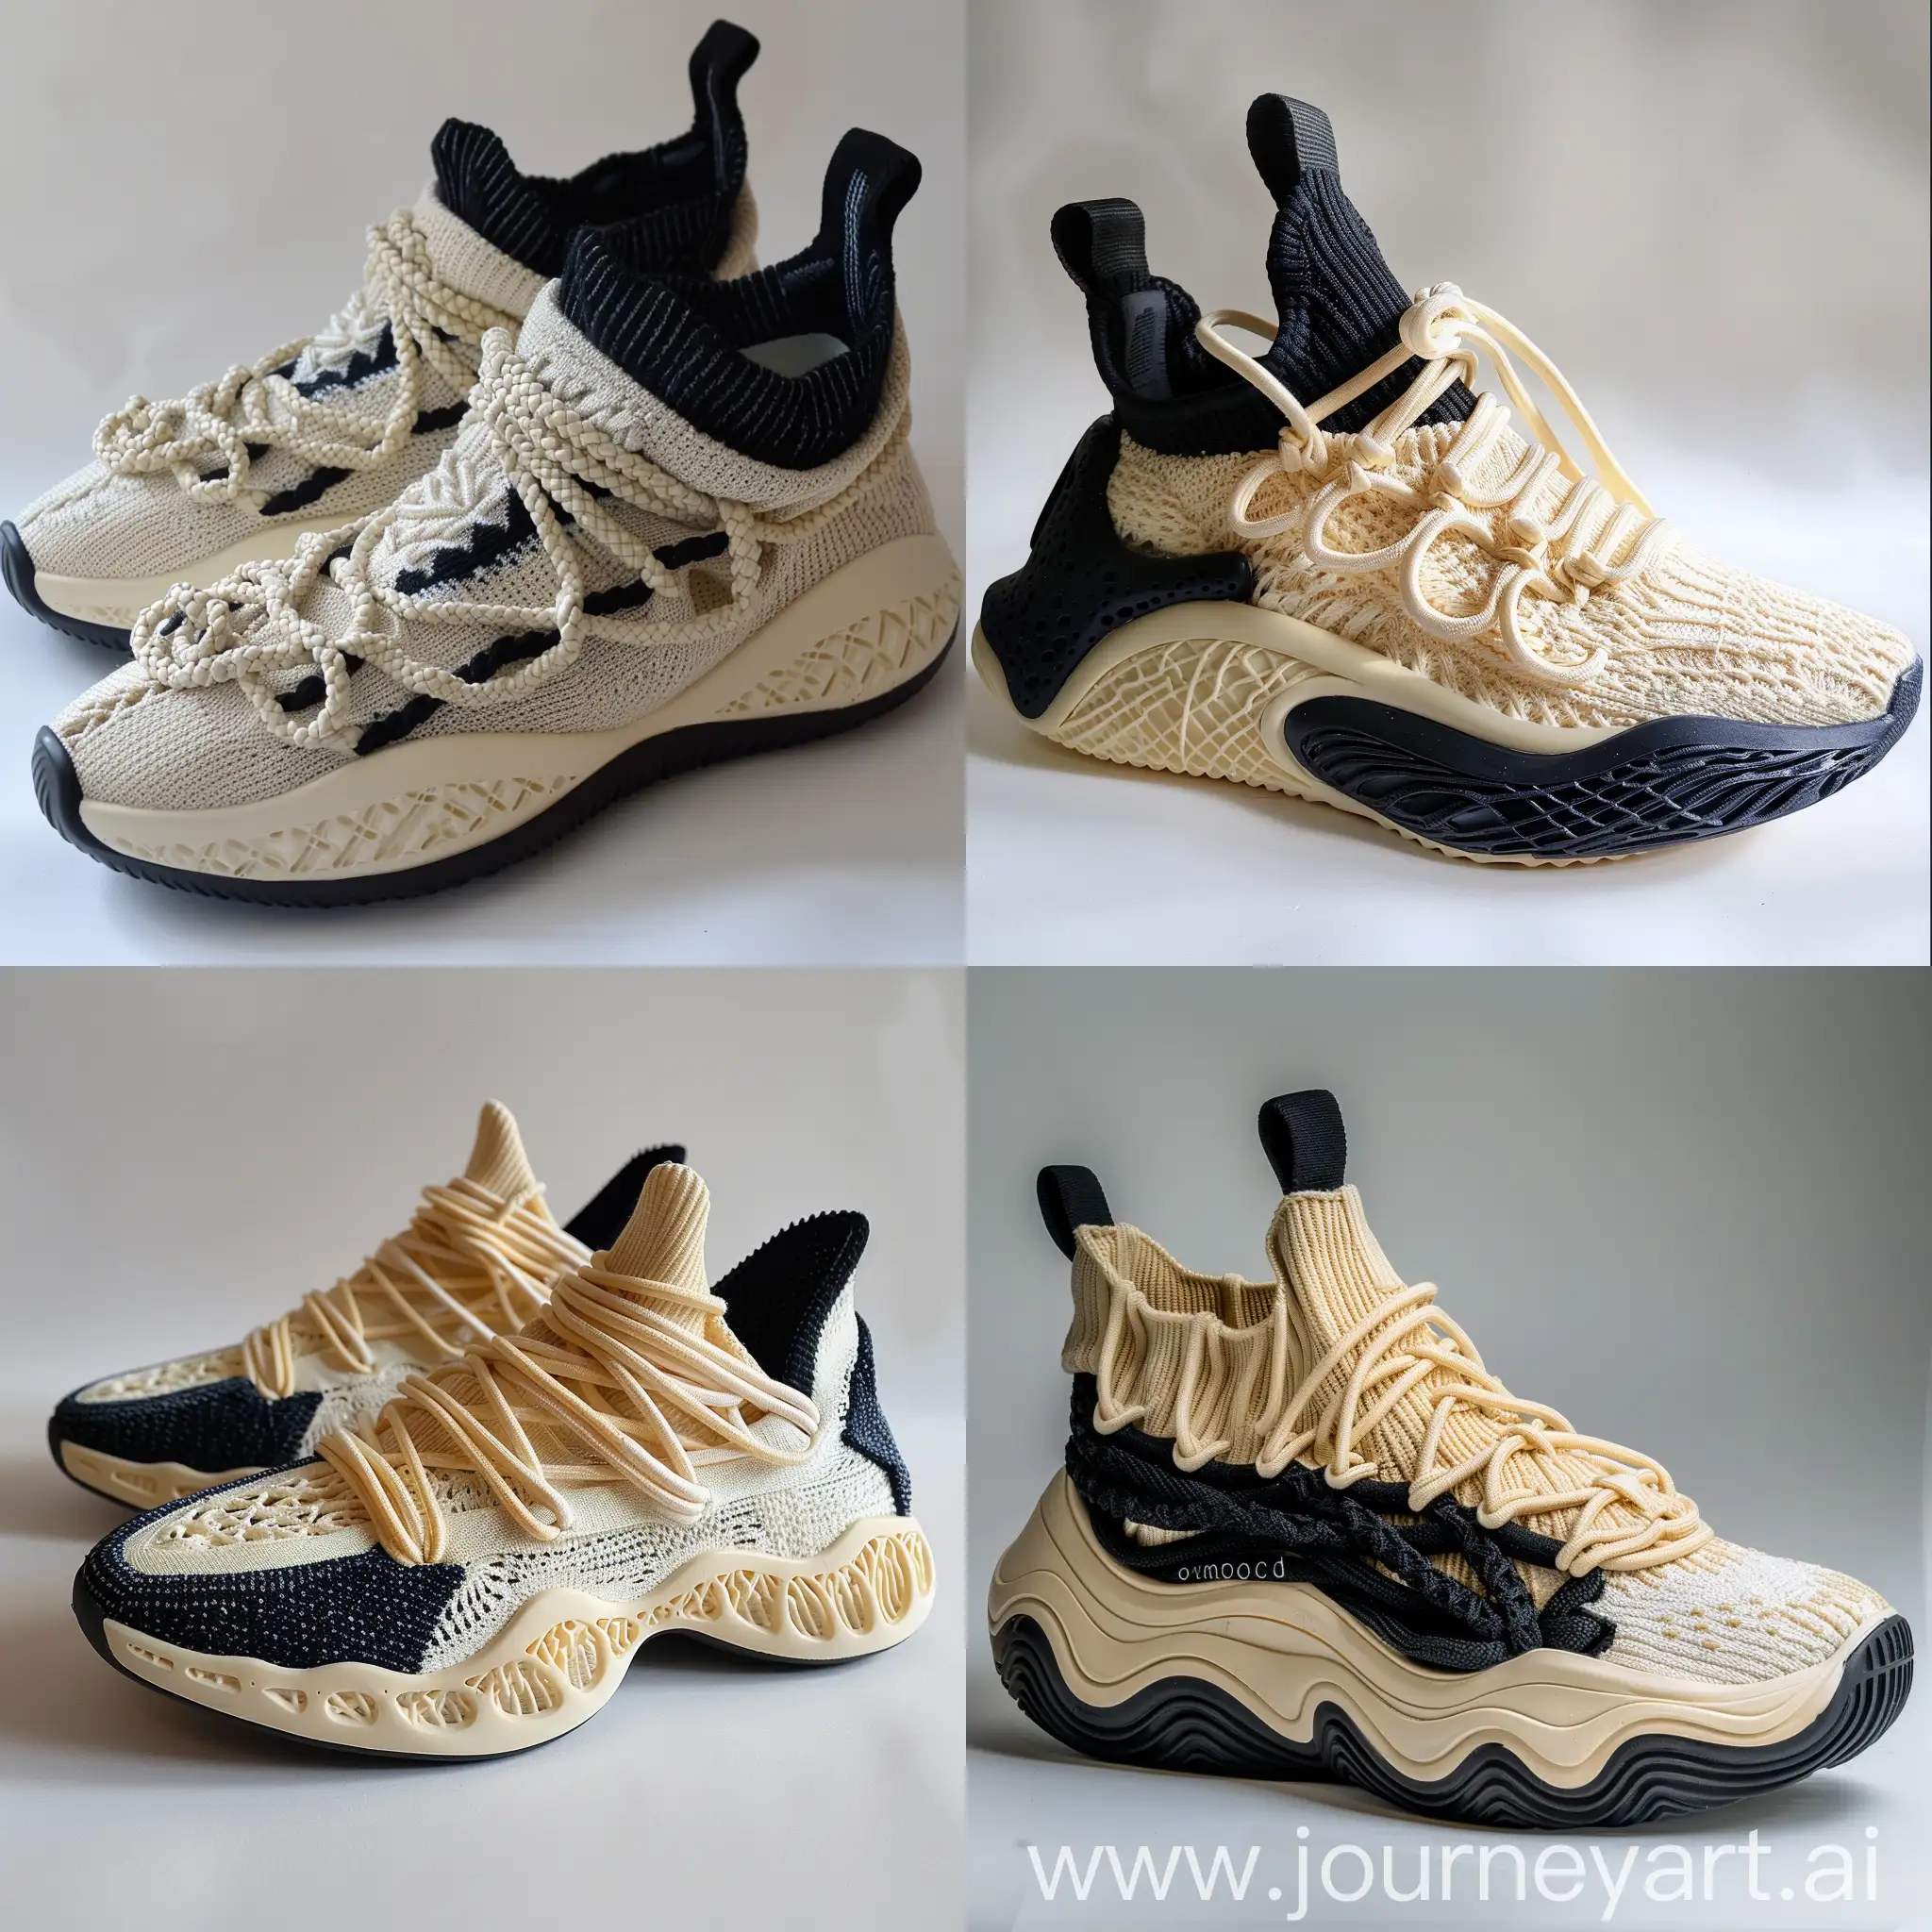 Orca-Whale-Inspired-Cream-Knitted-Sneakers-with-Black-Accents